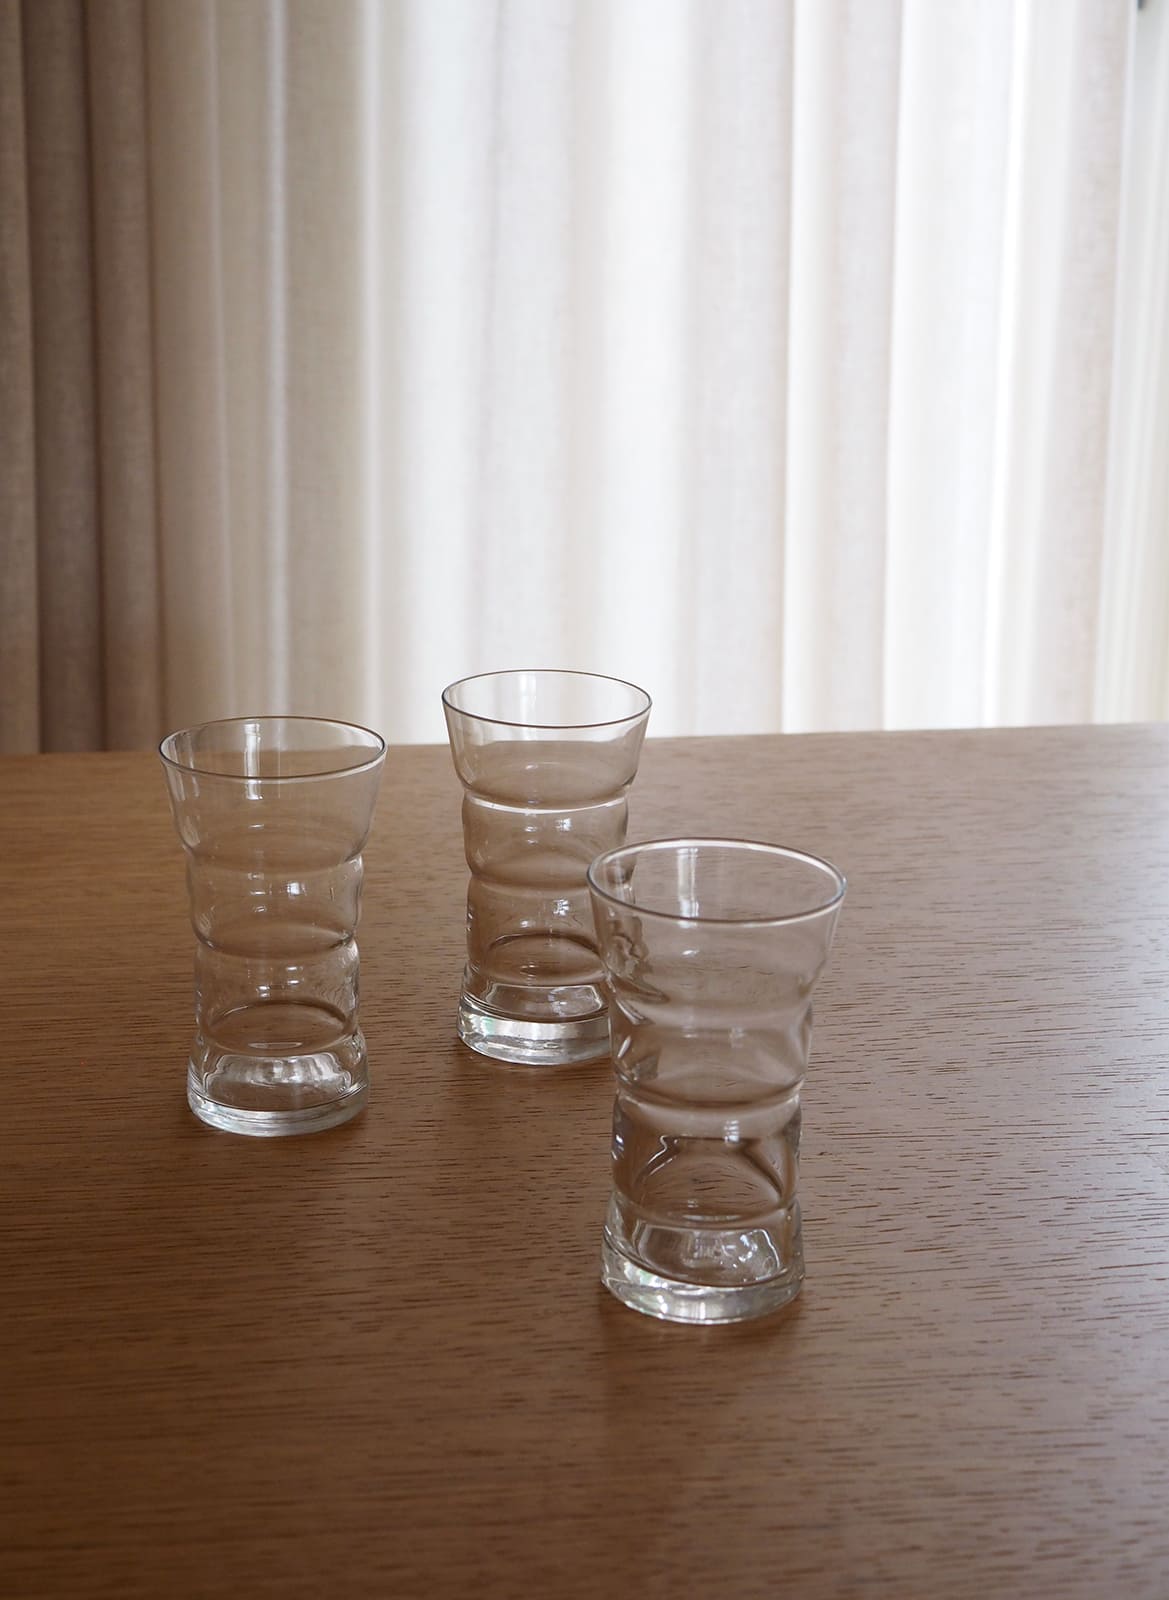 3 drinking glasses standing on a wooden table